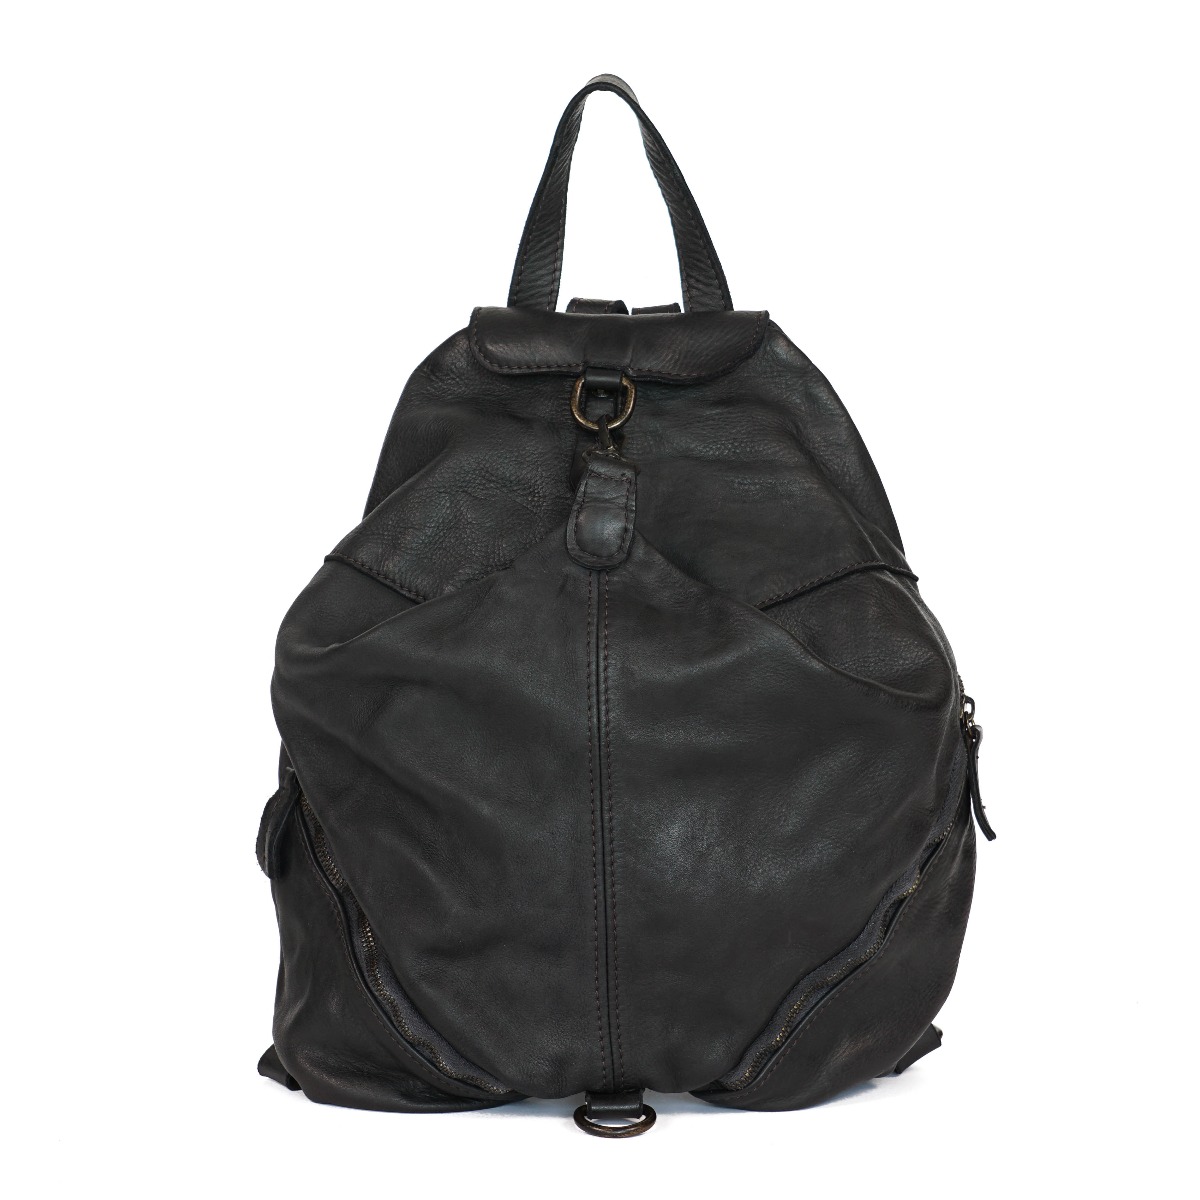 Black washed leather backpack for women